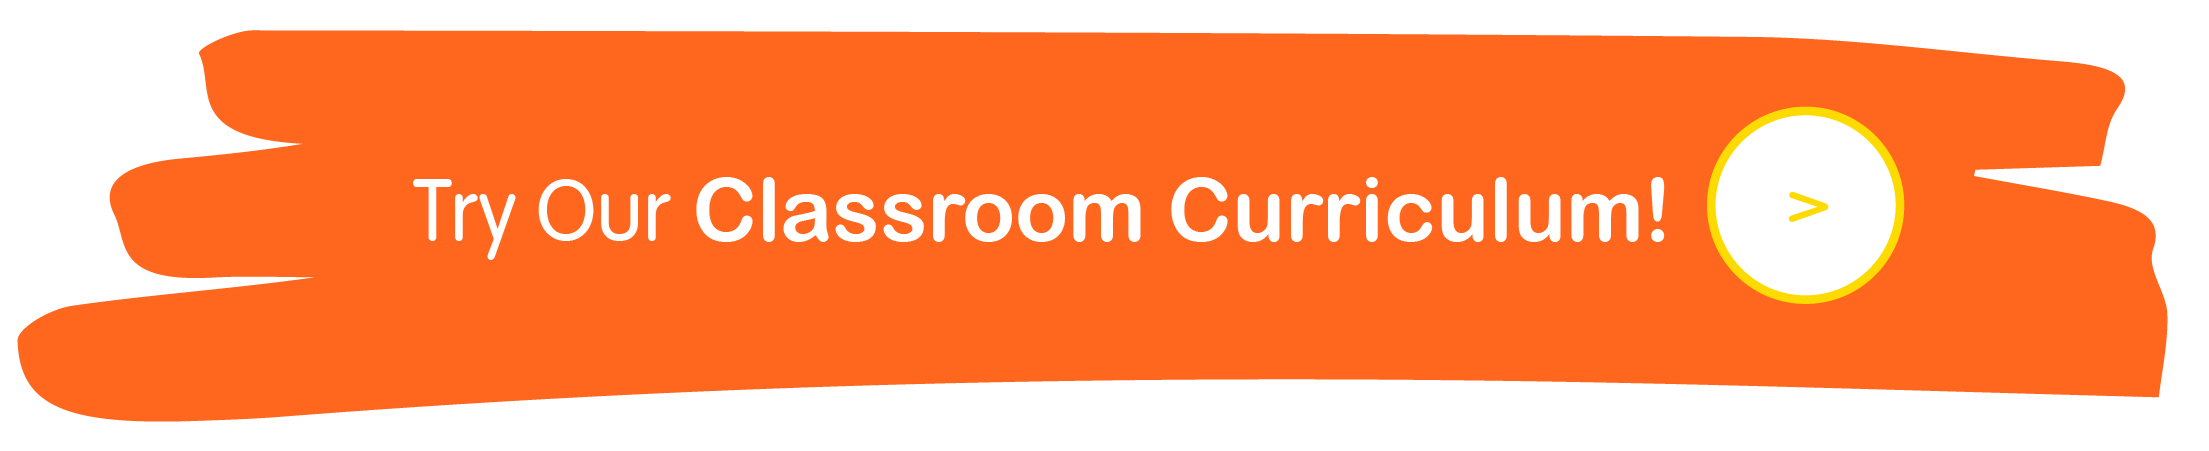 try our classroom curriculum!